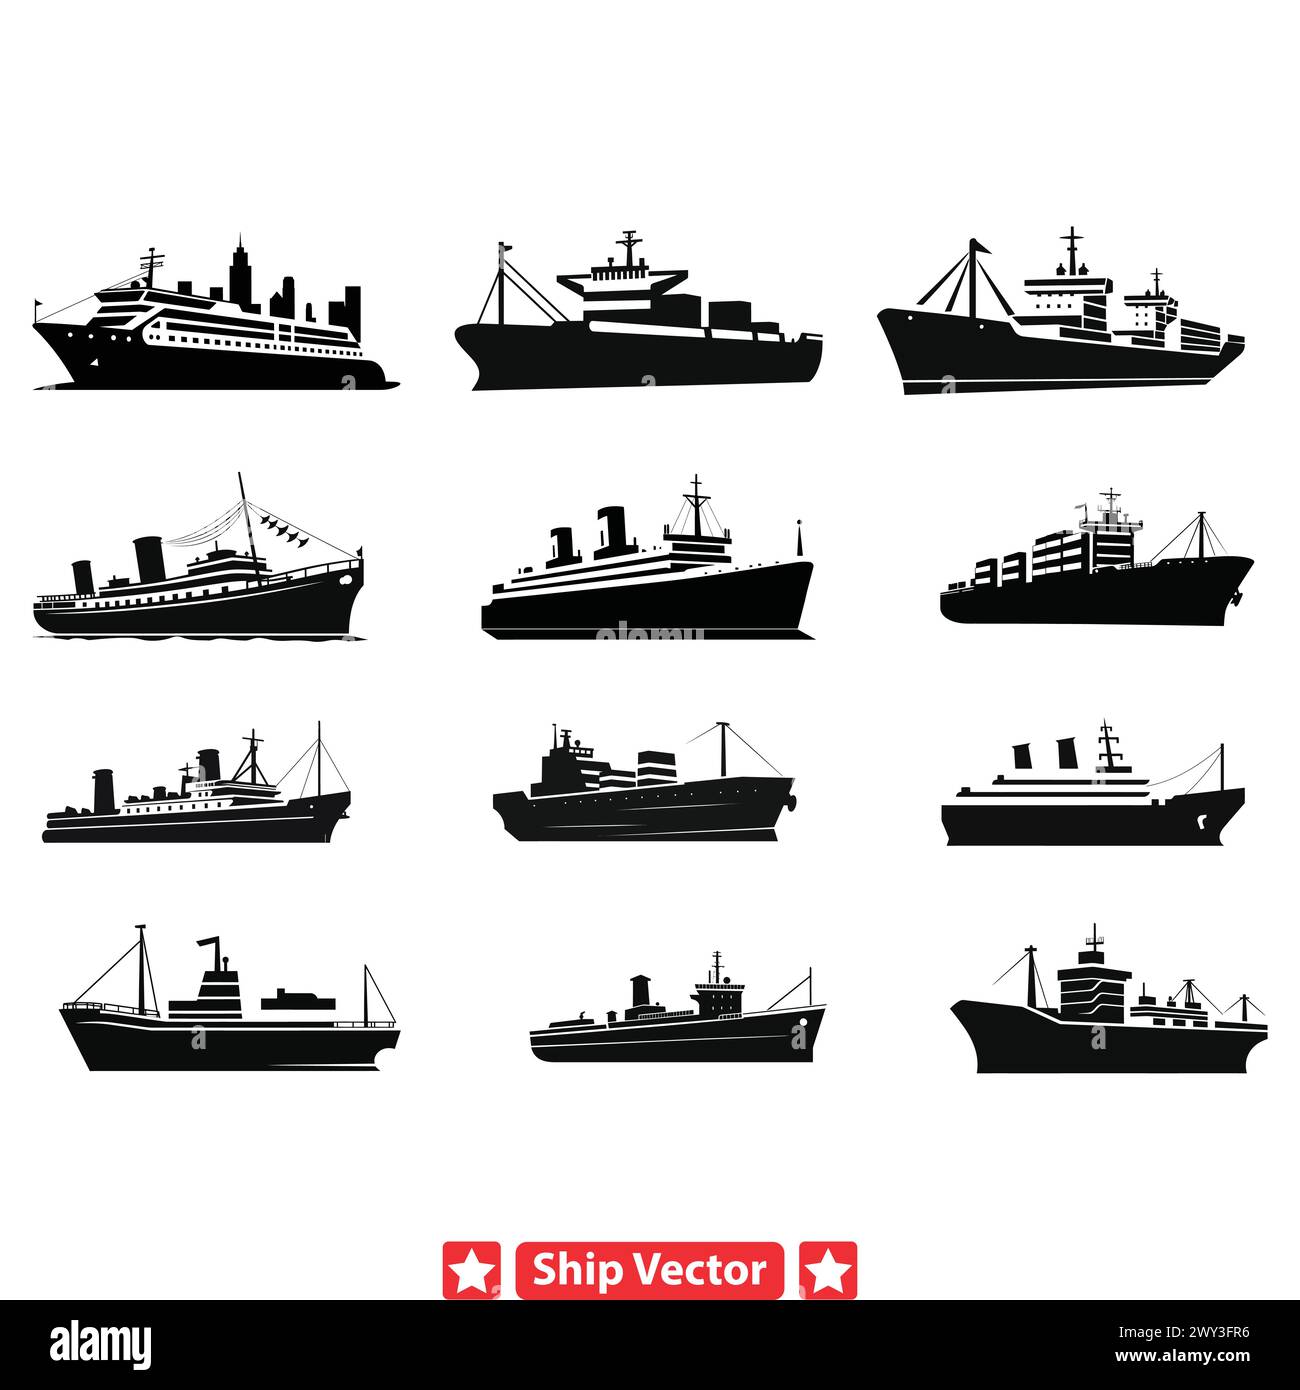 Ocean Guardians  Environmental Ship Silhouettes Advocating for Marine Conservation and Sustainability Stock Vector